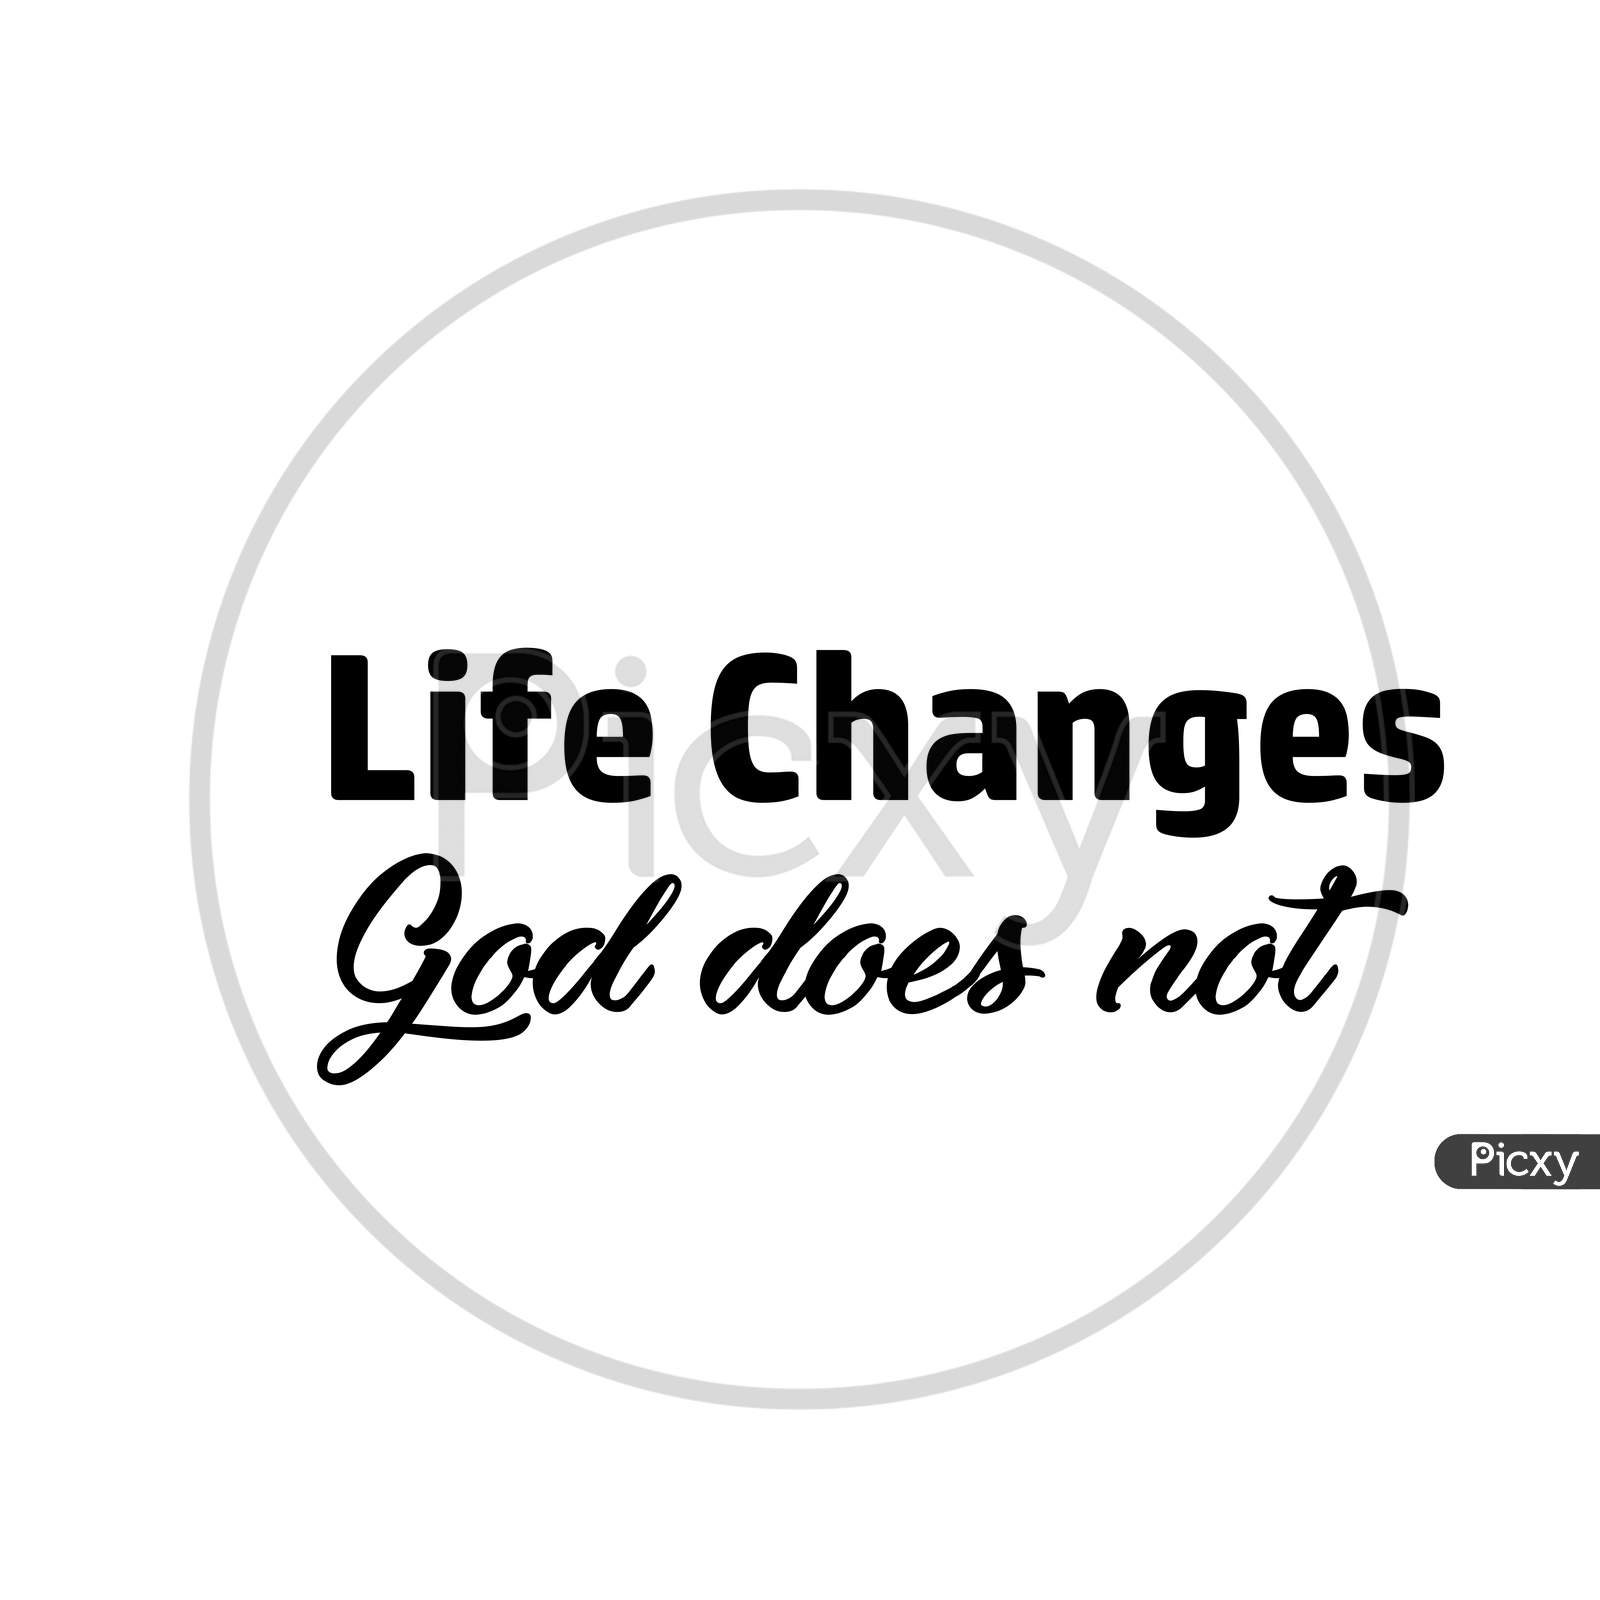 Biblical Phrase -Life changes, God does not